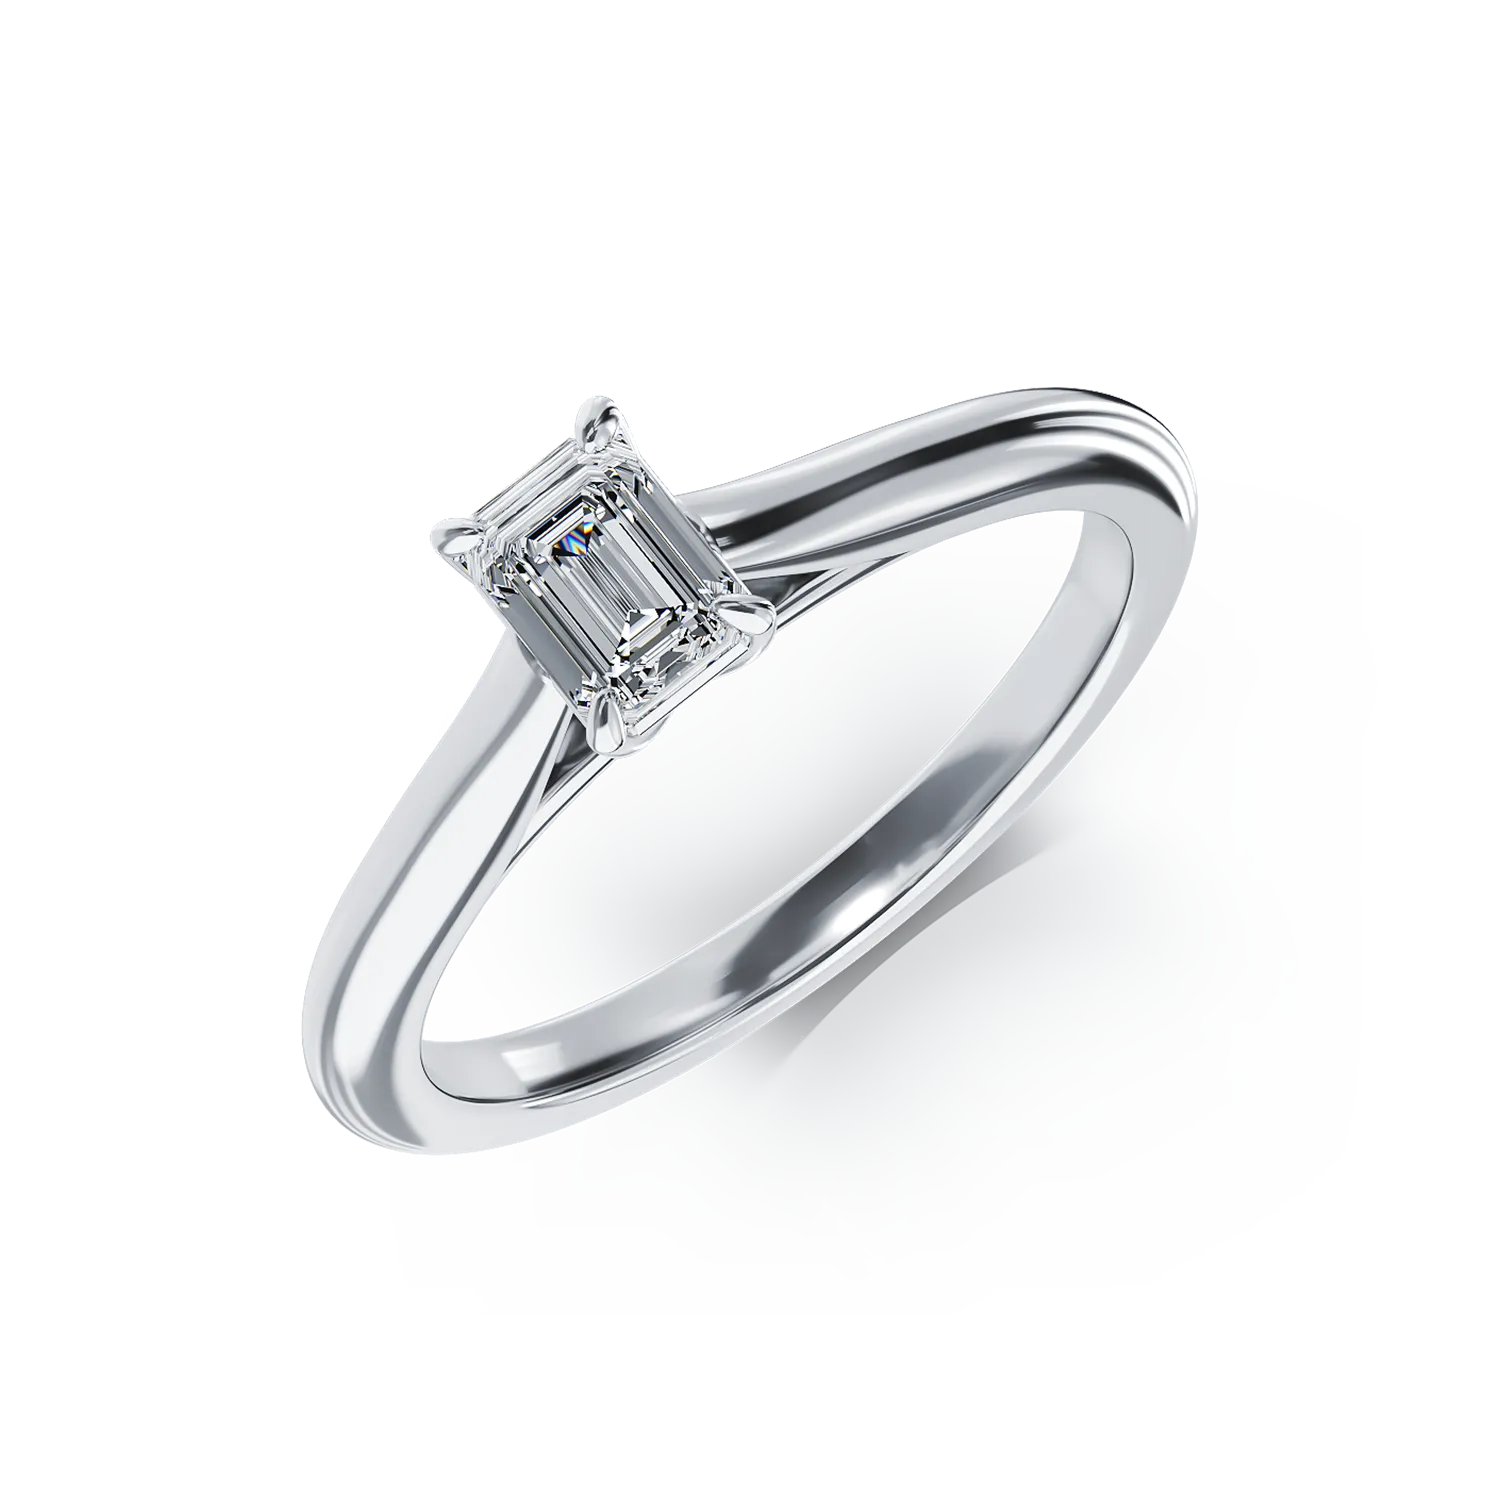 Platinum engagement ring with a 0.41ct solitaire diamond